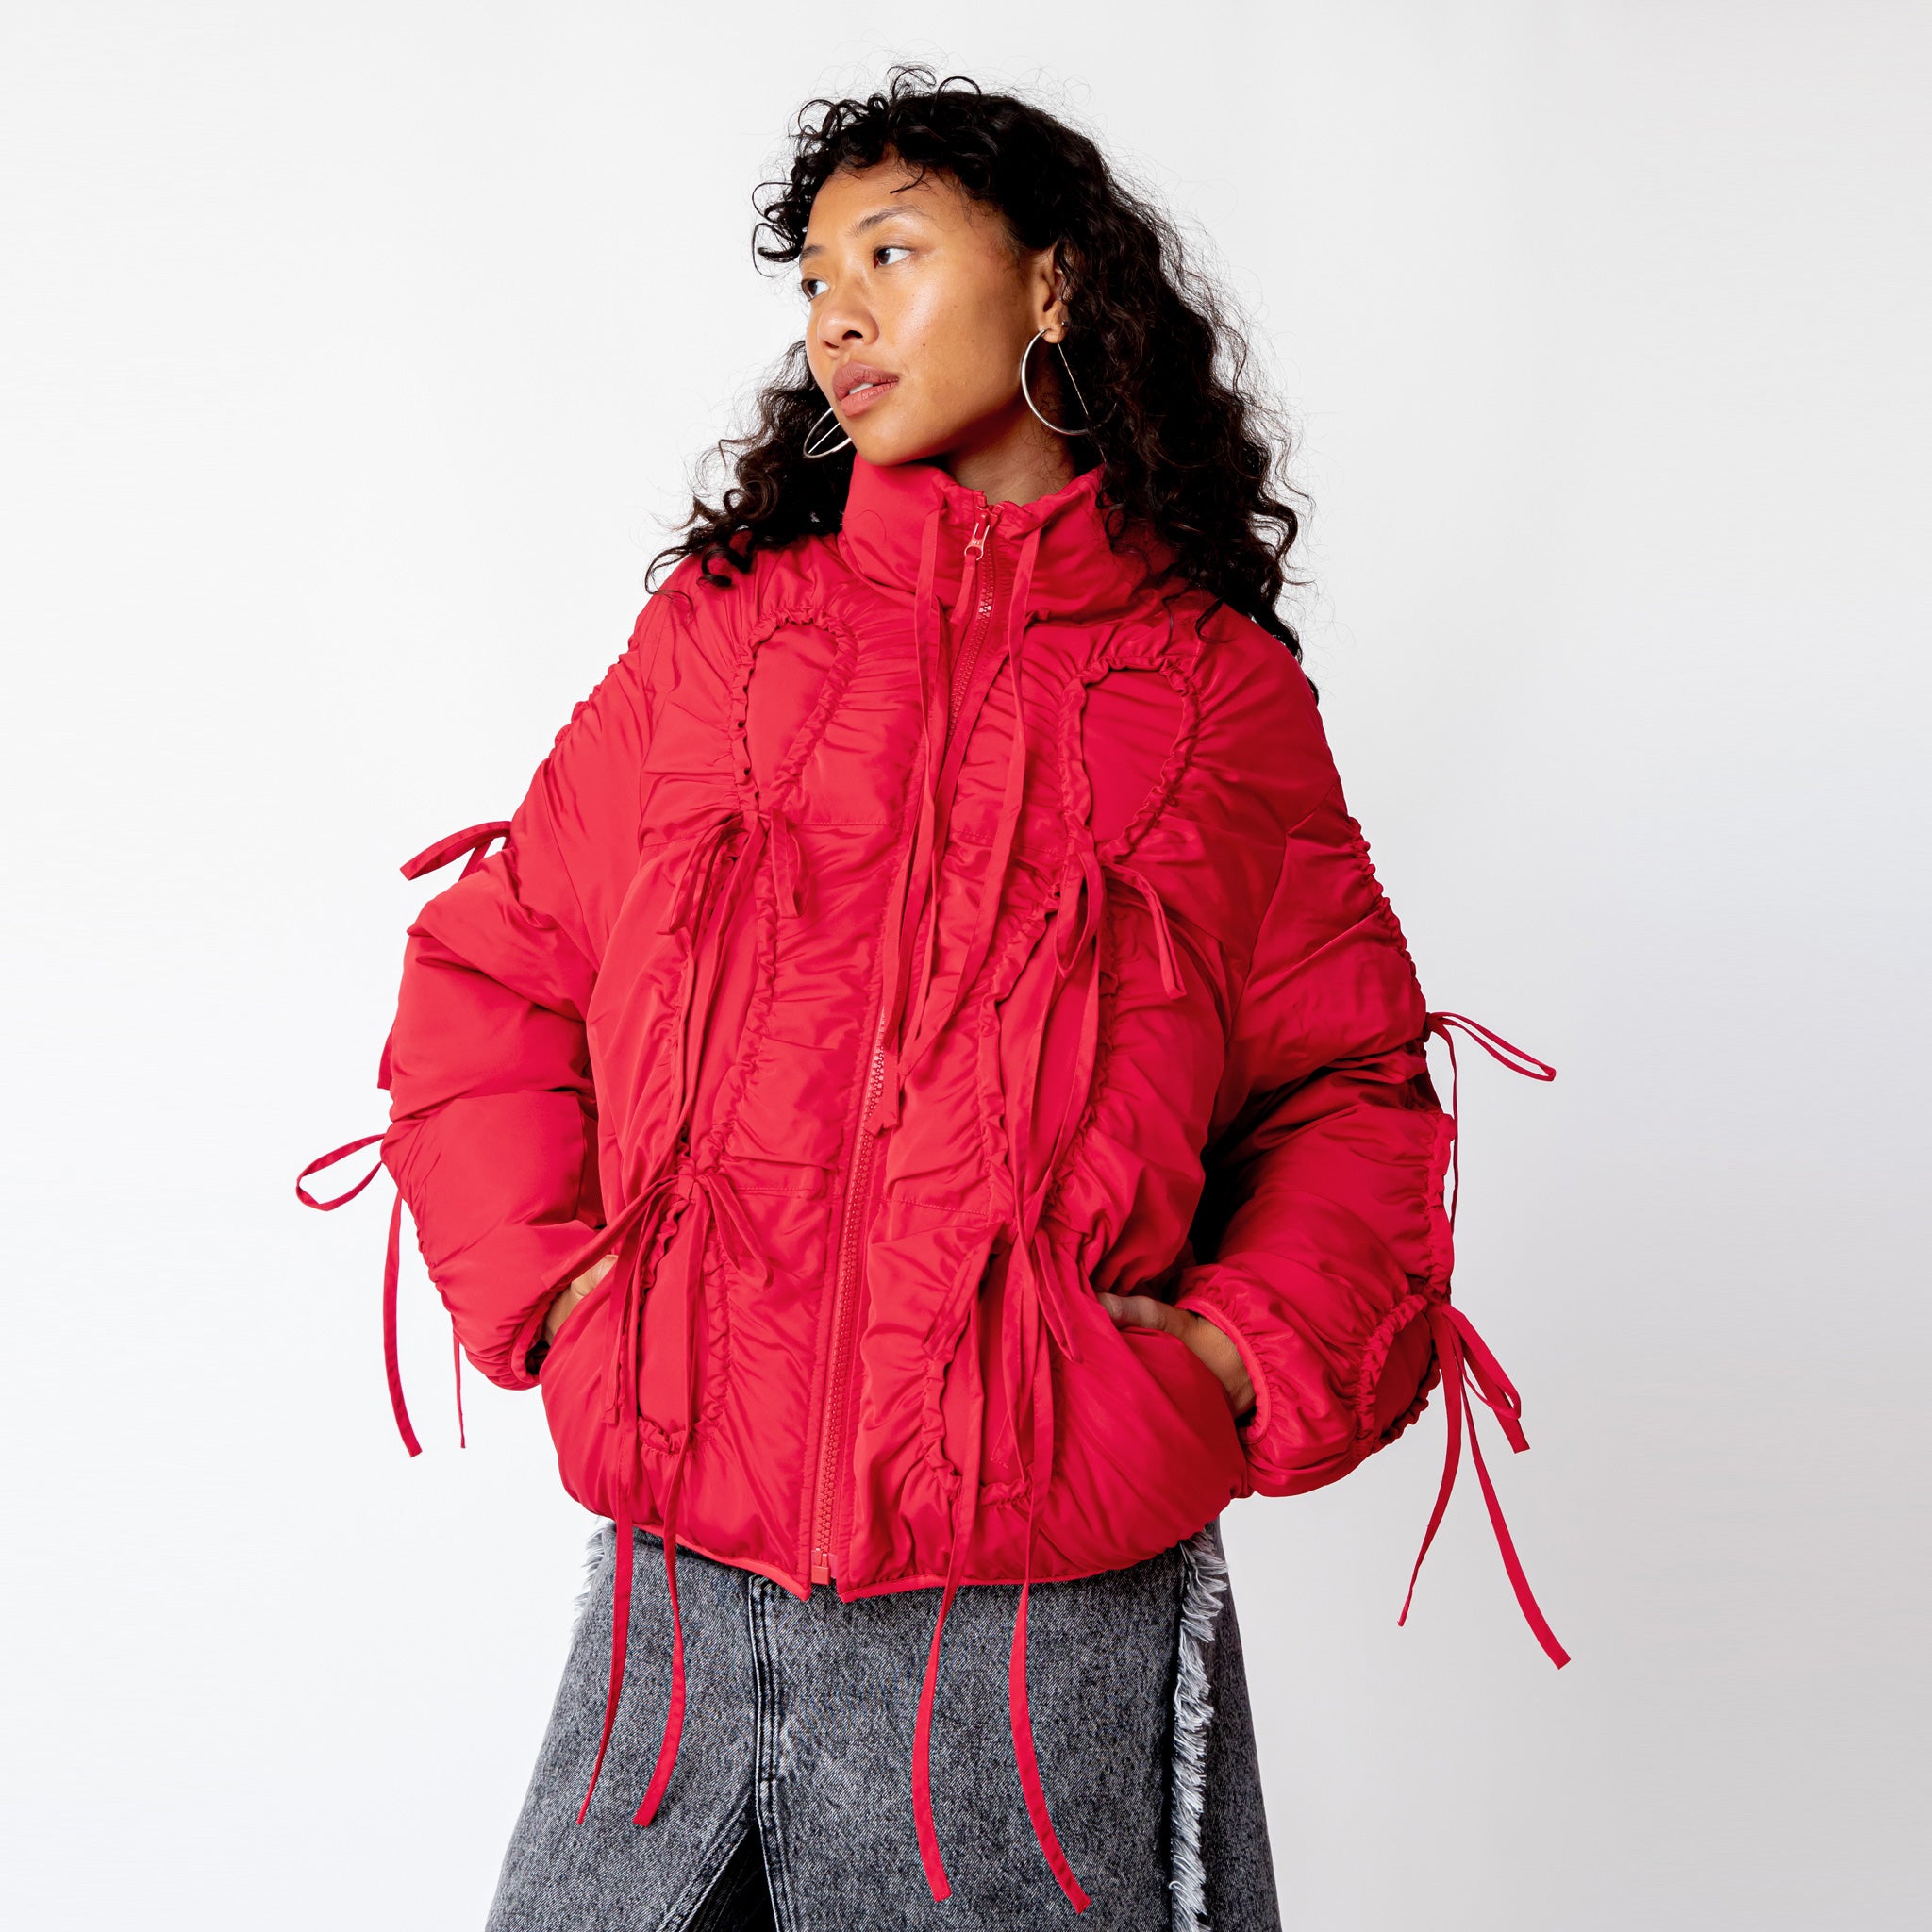 Half body photo of model wearing the Bommy Jacket - Red. The jacket features red bows all over the jacket.